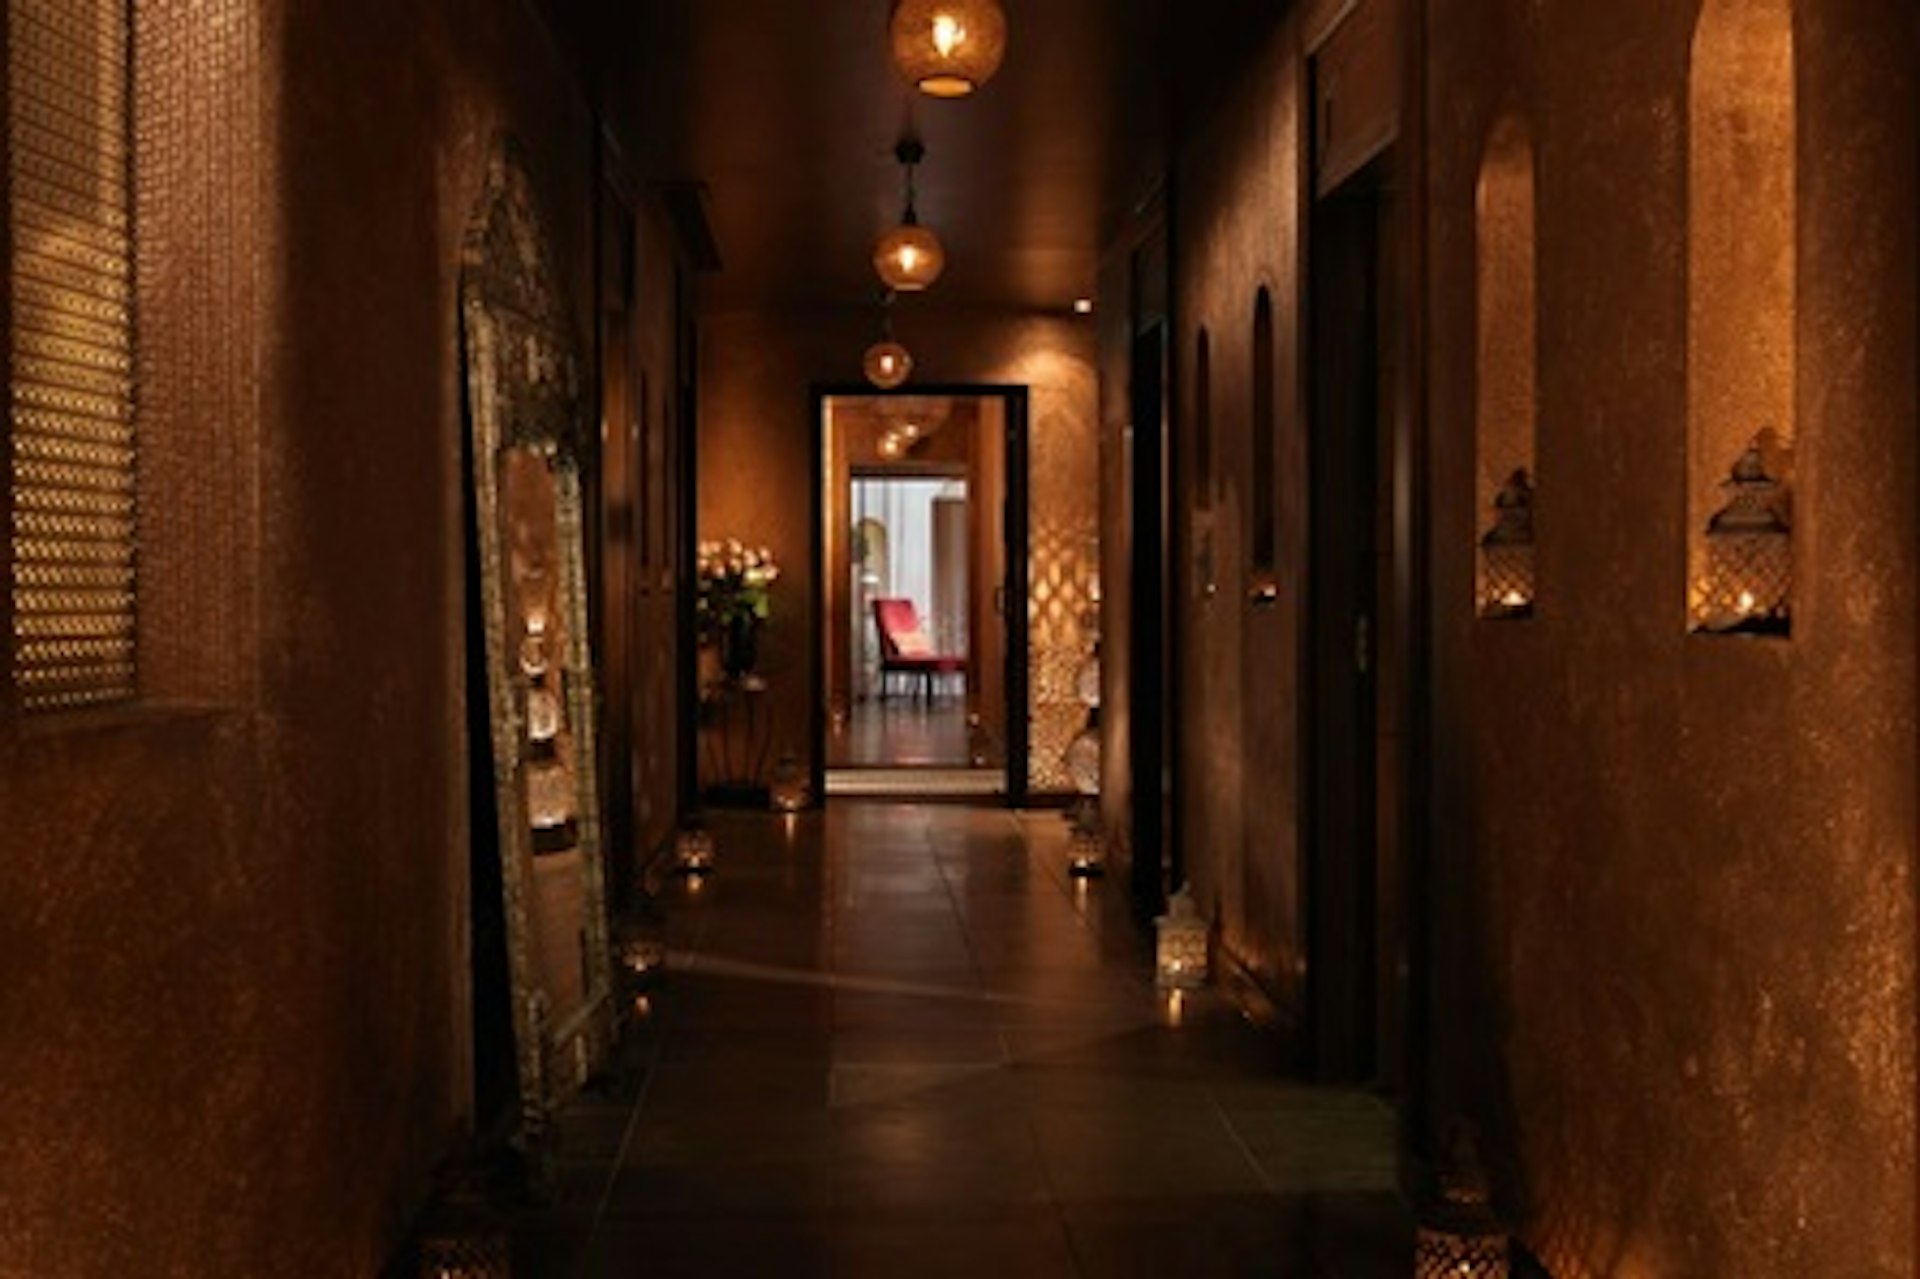 Moroccan Spa Day with Rhassoul and Massage for Two at The Spa in Dolphin Square